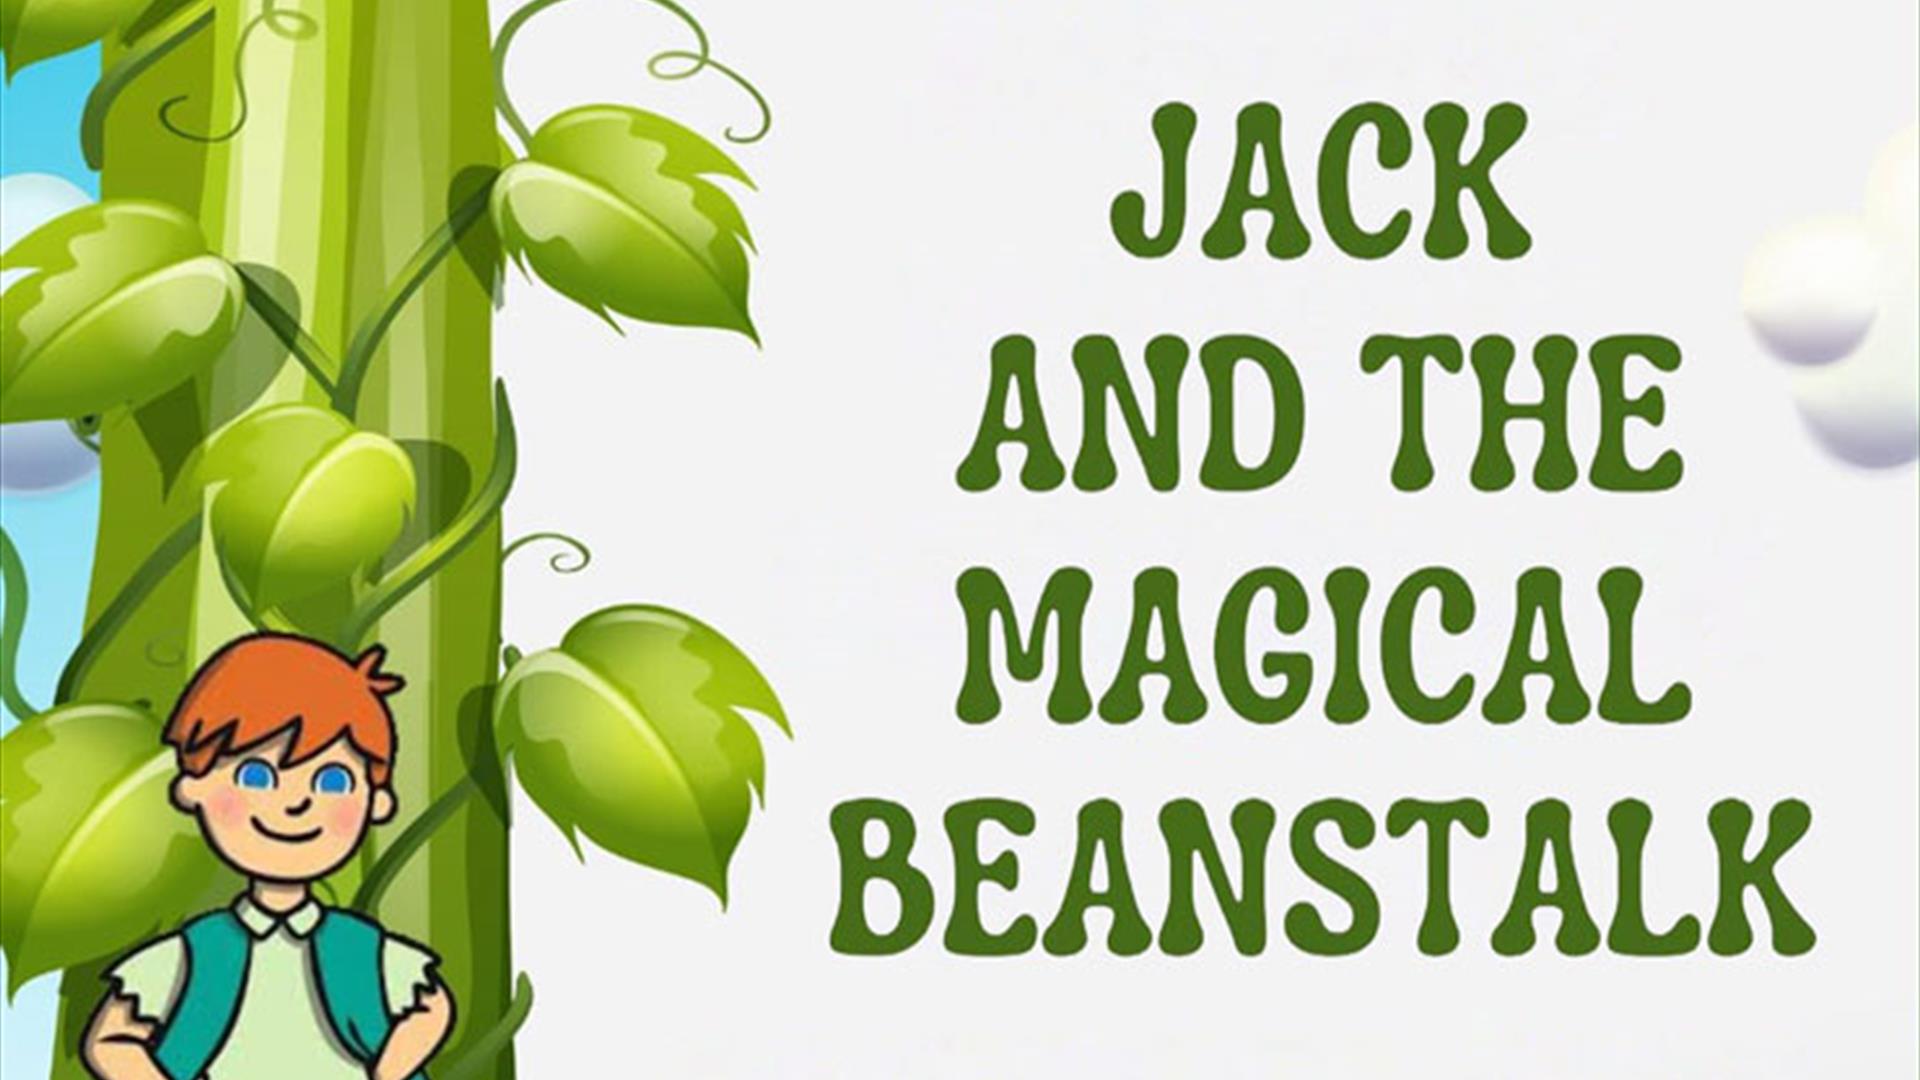 Poster Jack and the Magical Beanstalk with an image of Jack and the Beanstalk